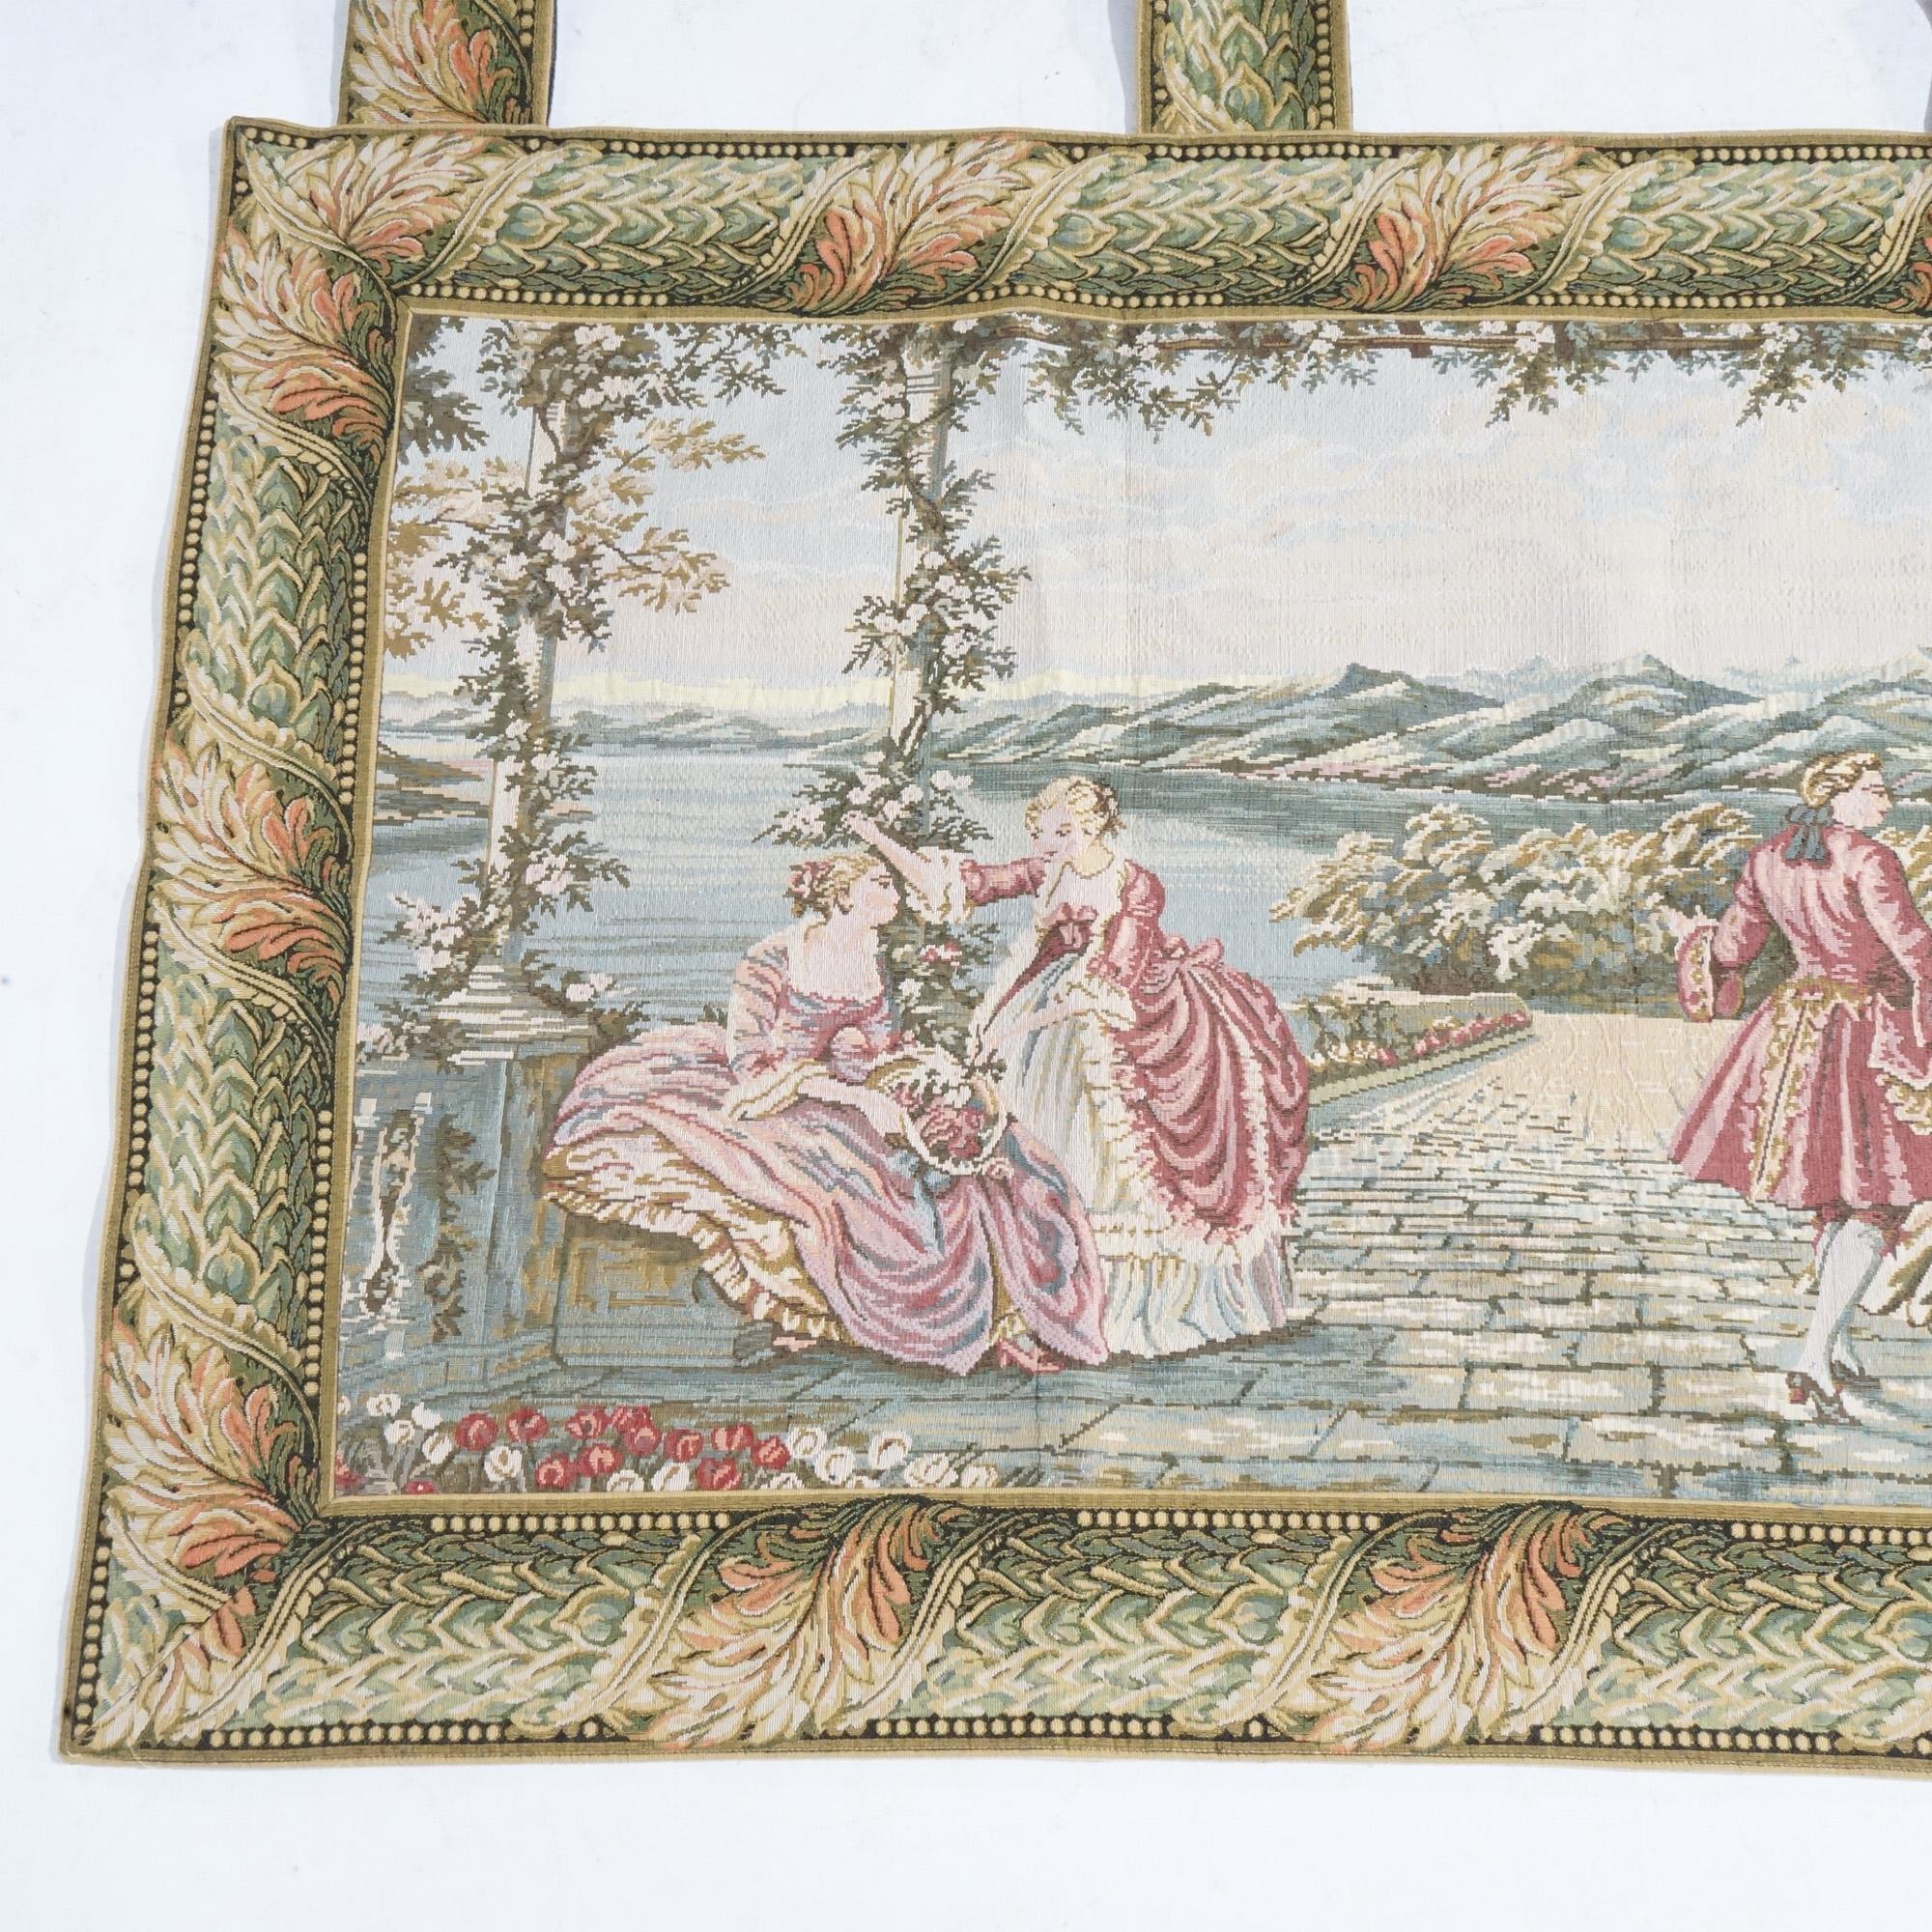 Contemporary Greco-Roman Scenic courtyard wall tapestry with figures and mountainous lake landscape, 20th century.

Measures- 40.25''H x 82.25''W x .5''D.